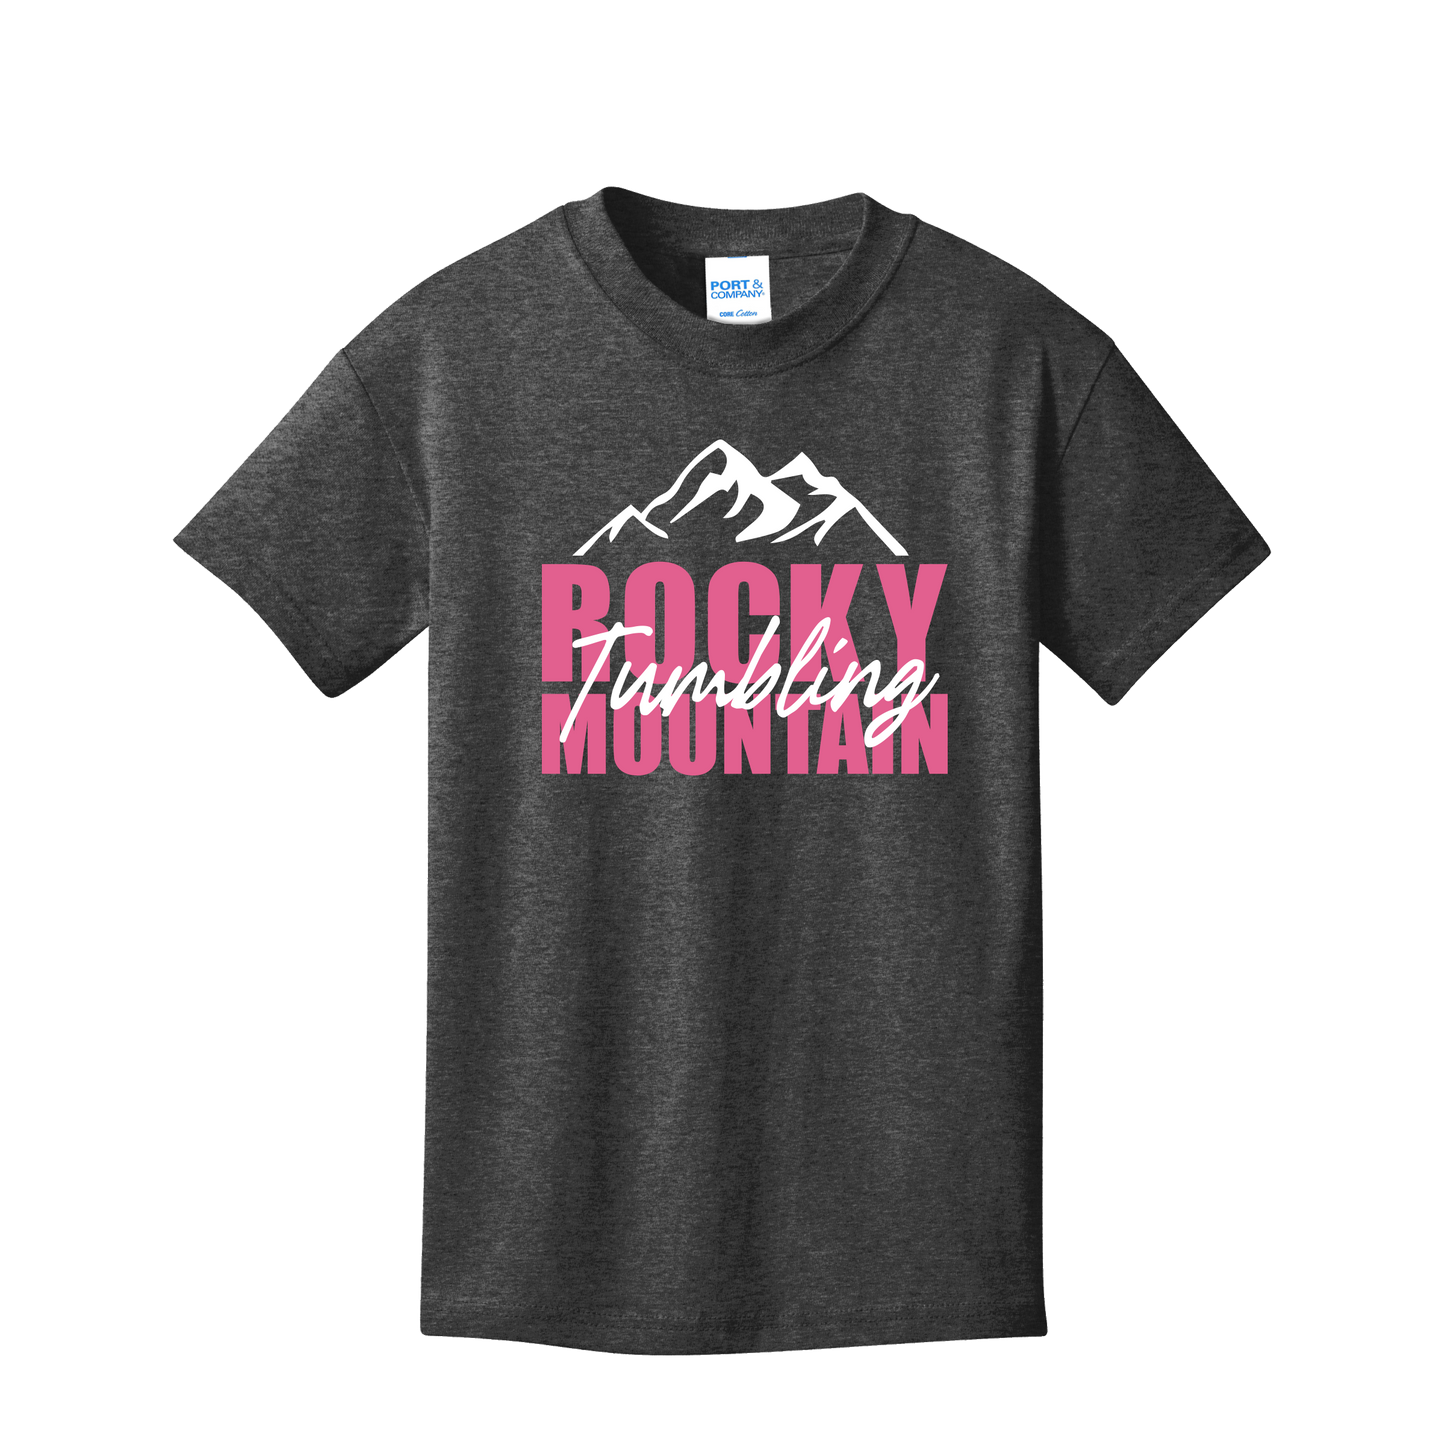 Port & Company® Core Cotton unisex all ages Tee - Mountain